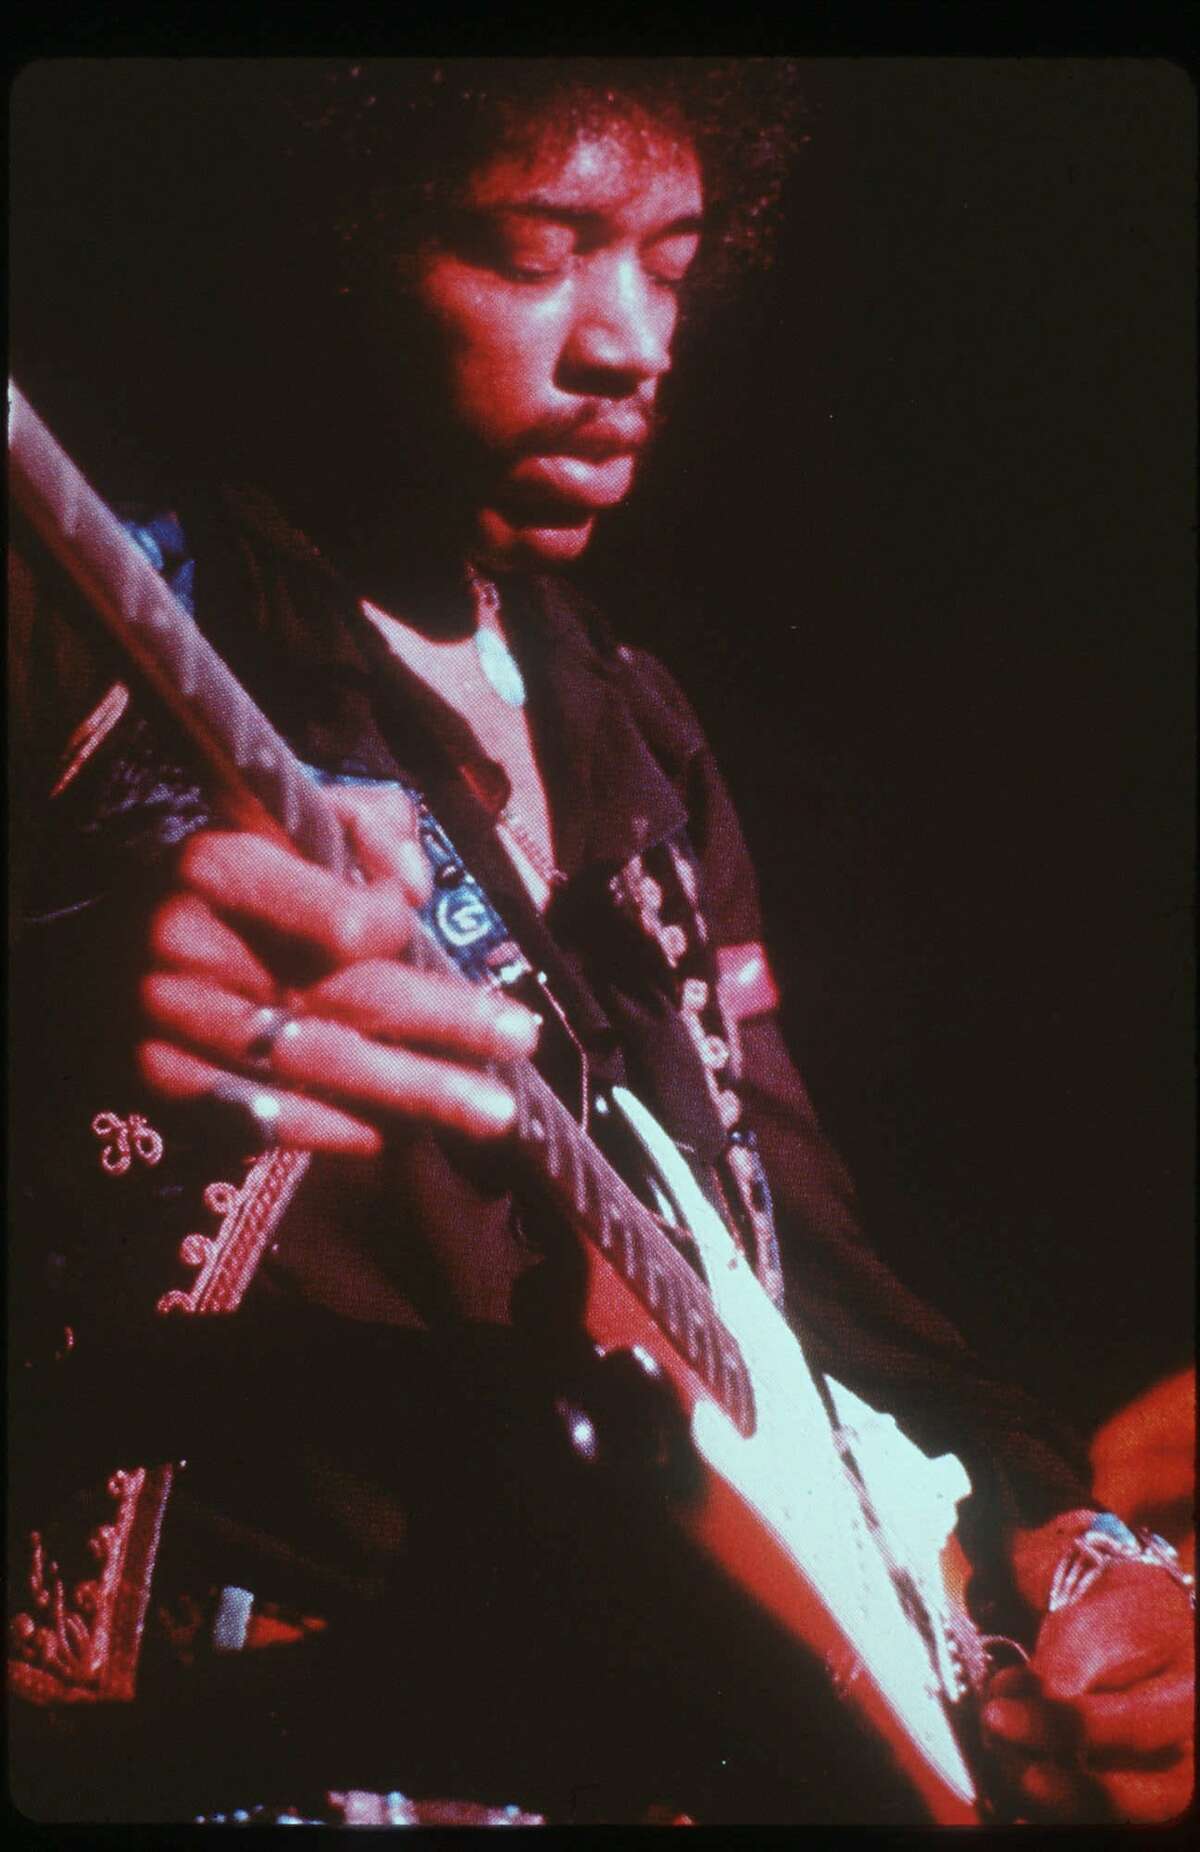 Legendary guitarist Jimi Hendrix is shown in this undated photo. Hendrix has been voted the instruments greatest player in a poll conducted by Total Guitar magazine. Hendrix, who died in 1970 at 27, beat Led Zeppelins Jimmy Page to the top spot in the poll of the magazines readers, it was announced this week. Eric Clapton came in third, followed by Slash of Guns N Roses and Brian May of Queen. (AP Photo/HO)